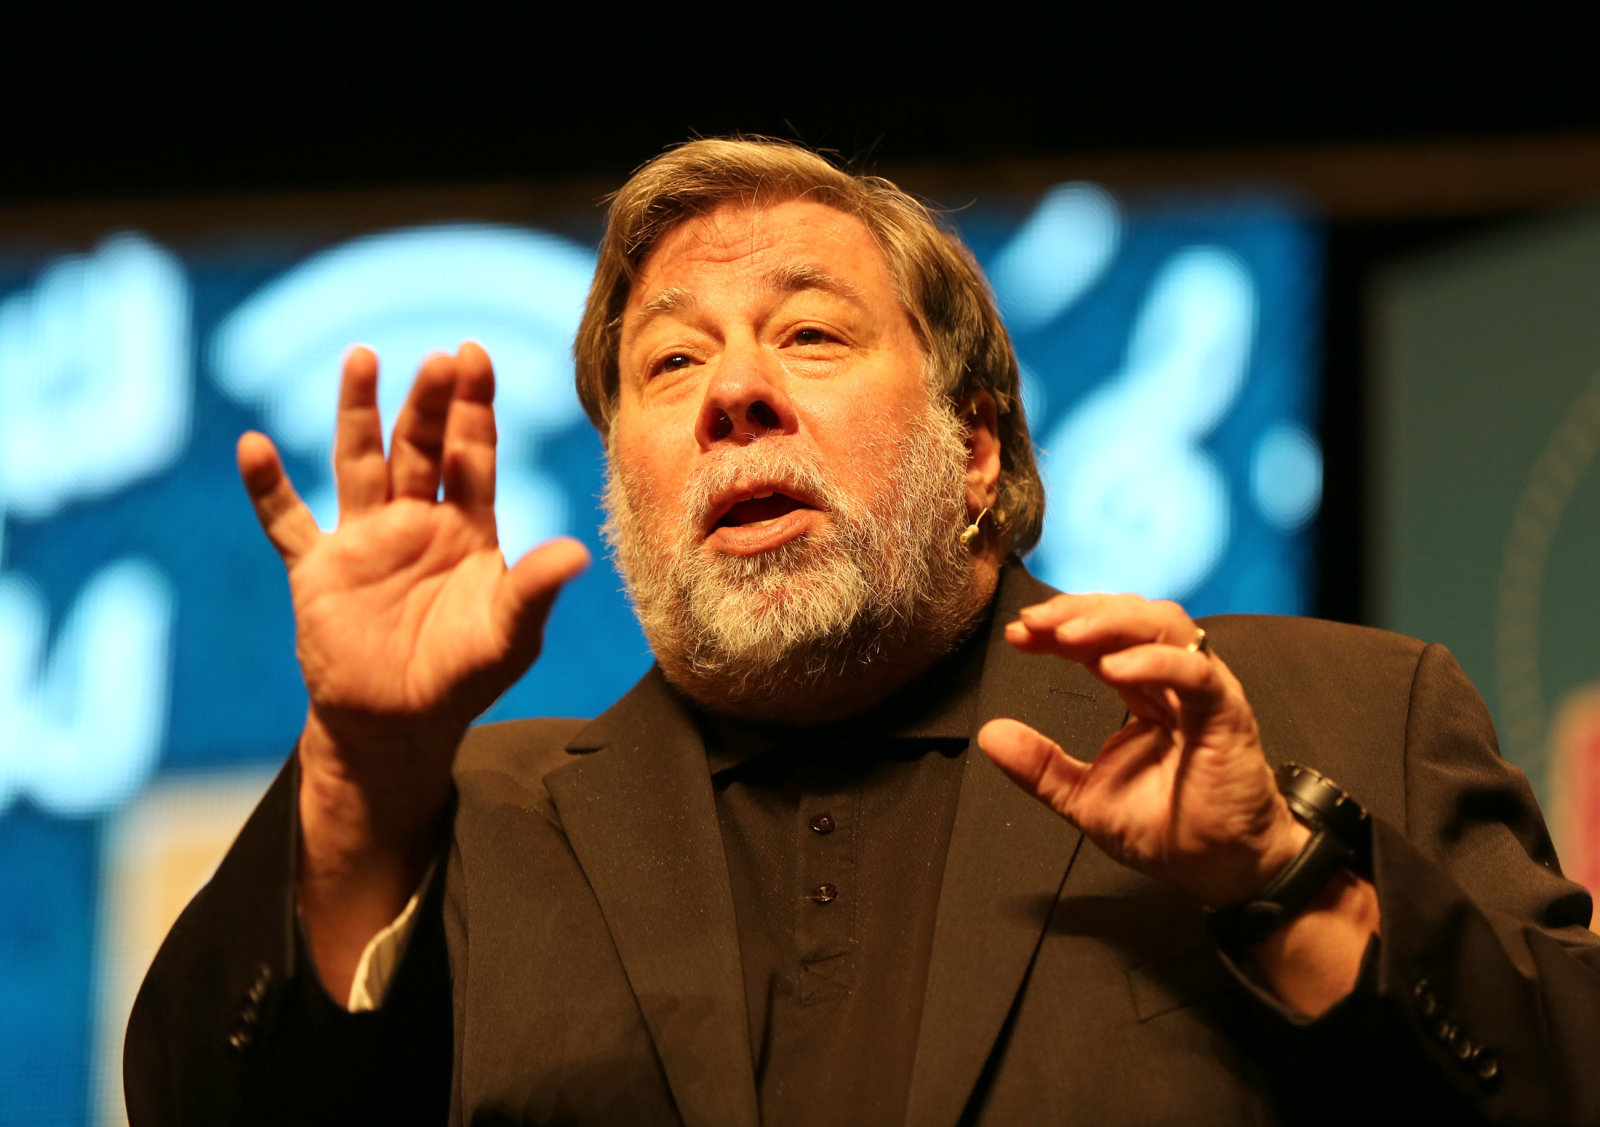 Steve Wozniak, the co-founder of a US technology giant Apple which used its Irish subsidiaries to lower its tax bill, speaking at the Millennium forum in Londonderry has said big corporations should be treated the same as the &quot;little guy&quot;.